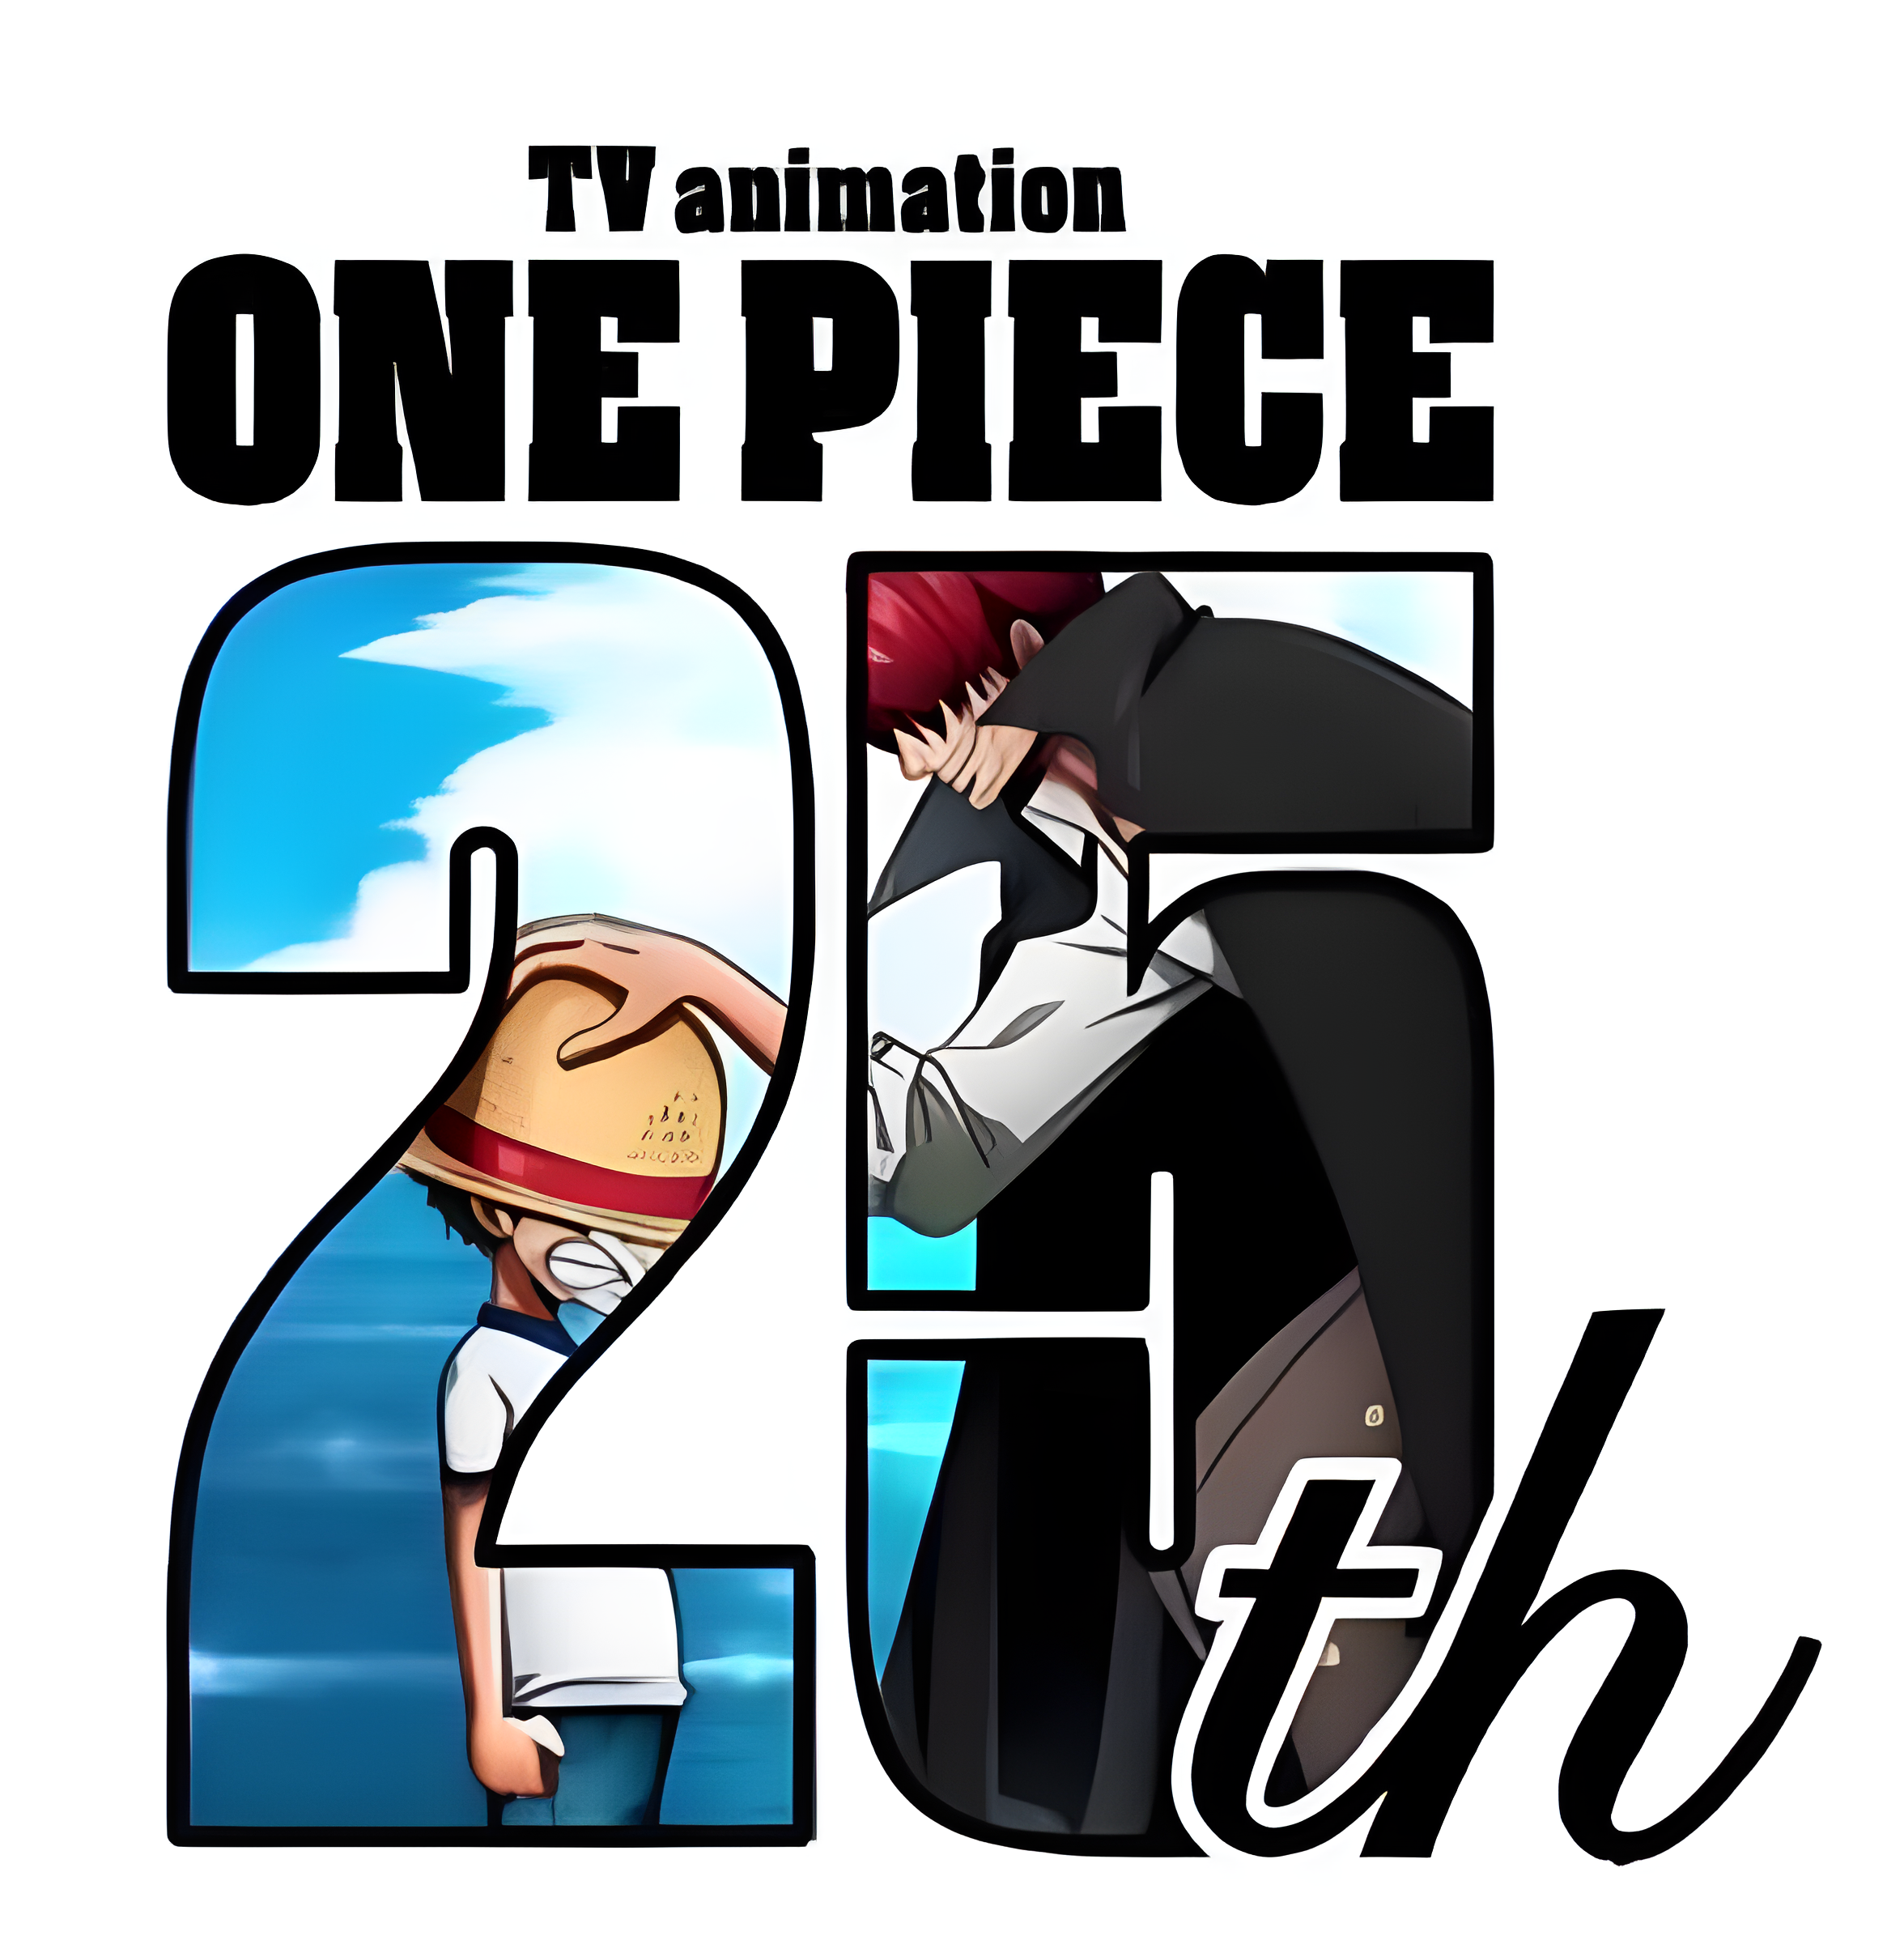 insert image of "ONE PIECE 25th" or "OP25th" logo